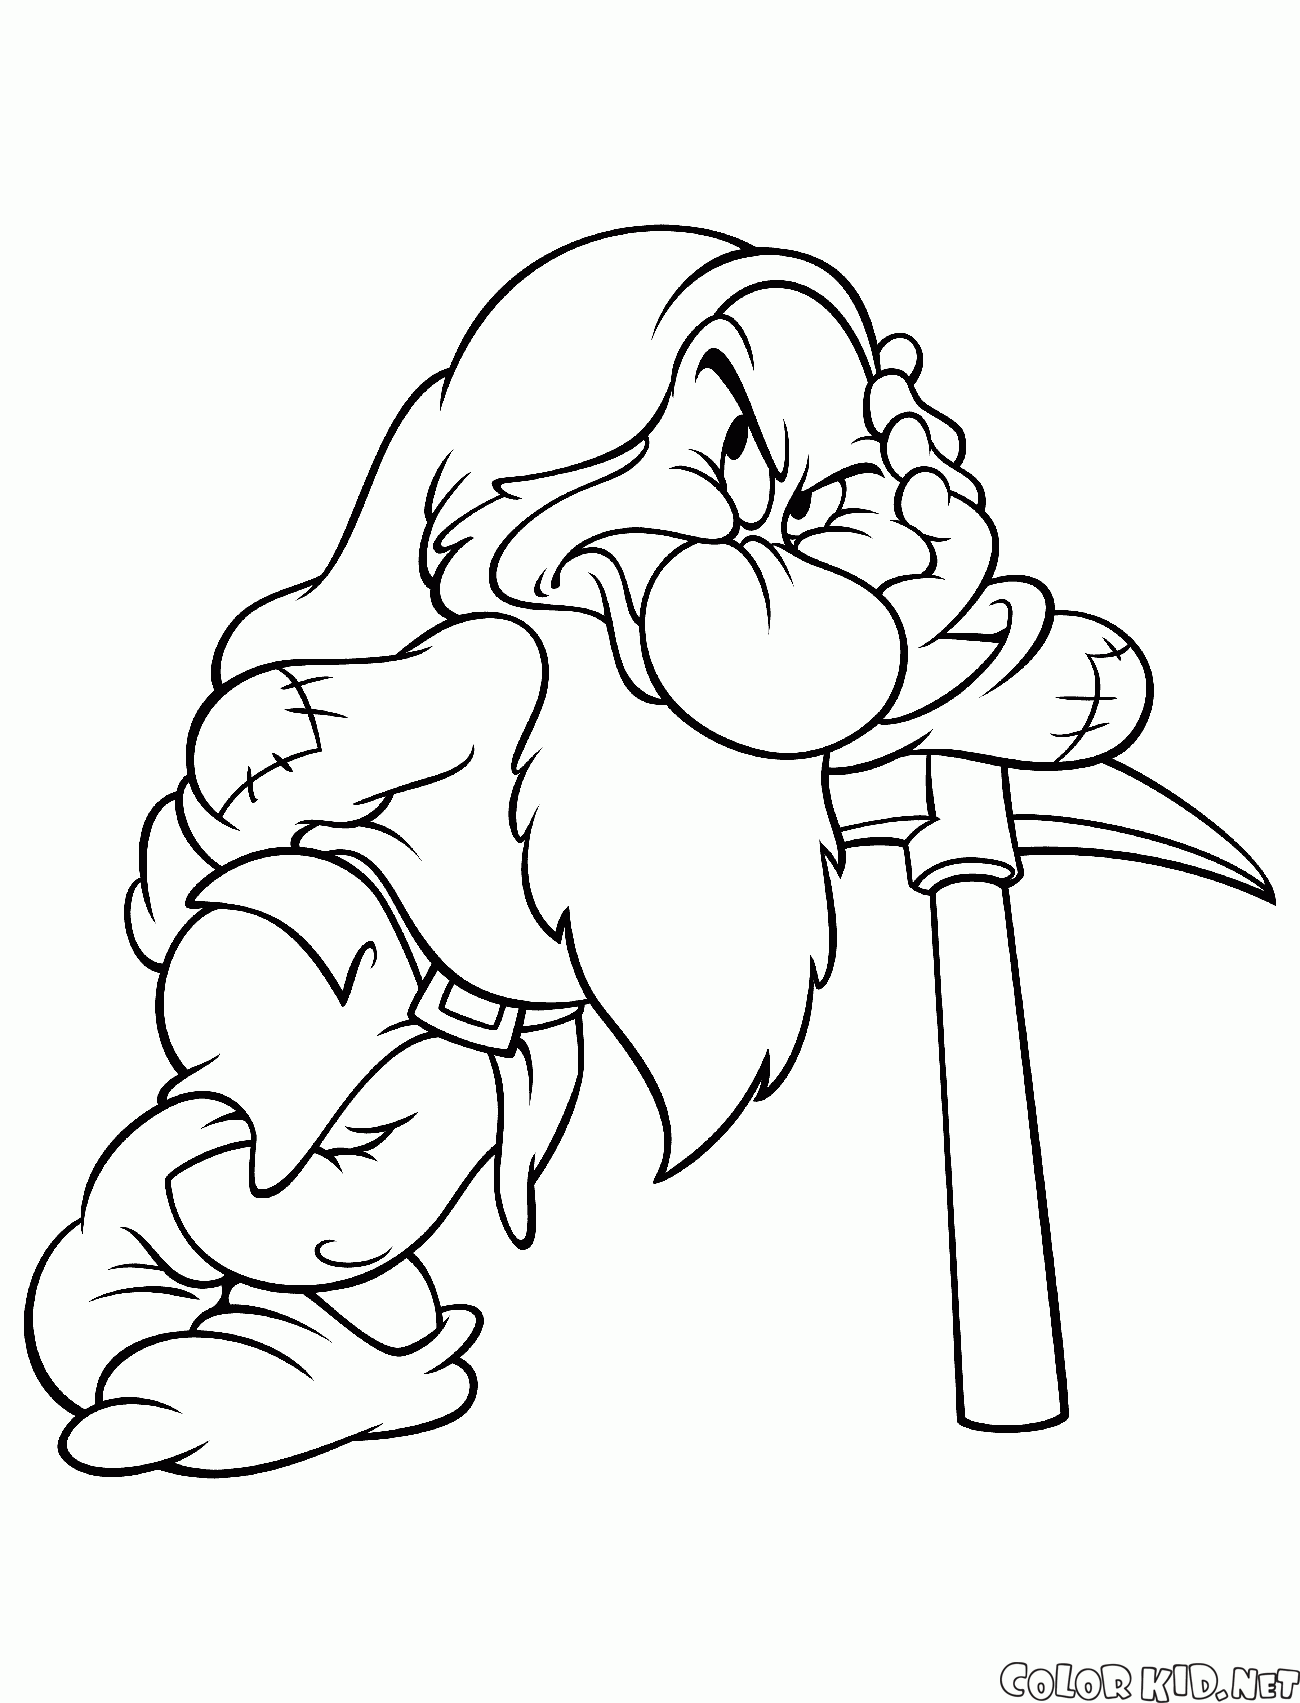 Coloring page - Snow White and the Seven Dwarfs